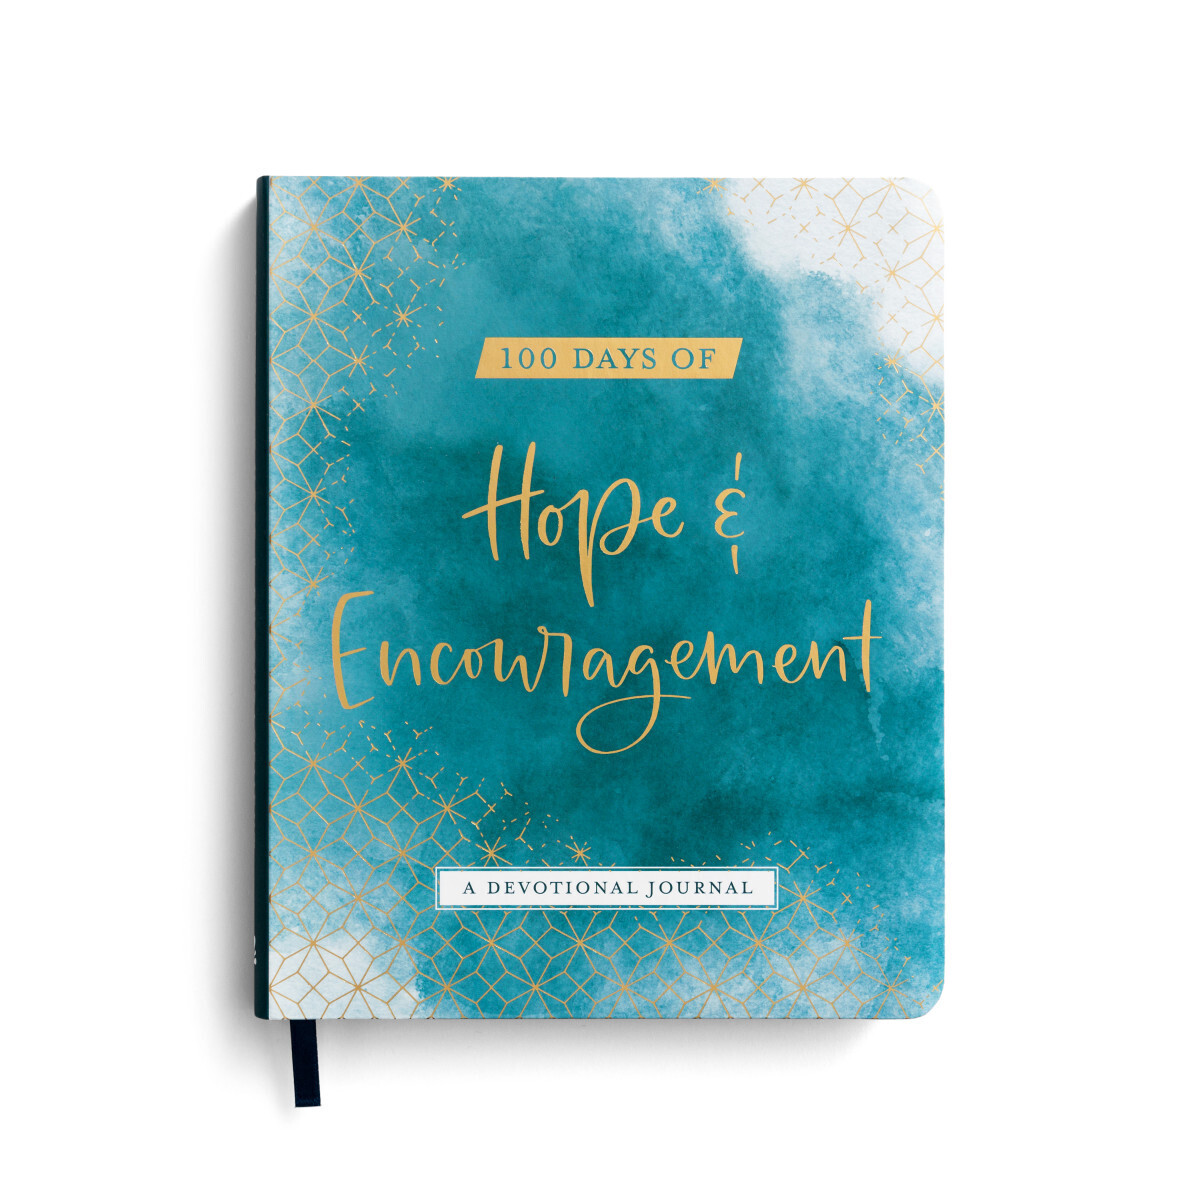 100 Days of Hope and Encouragement